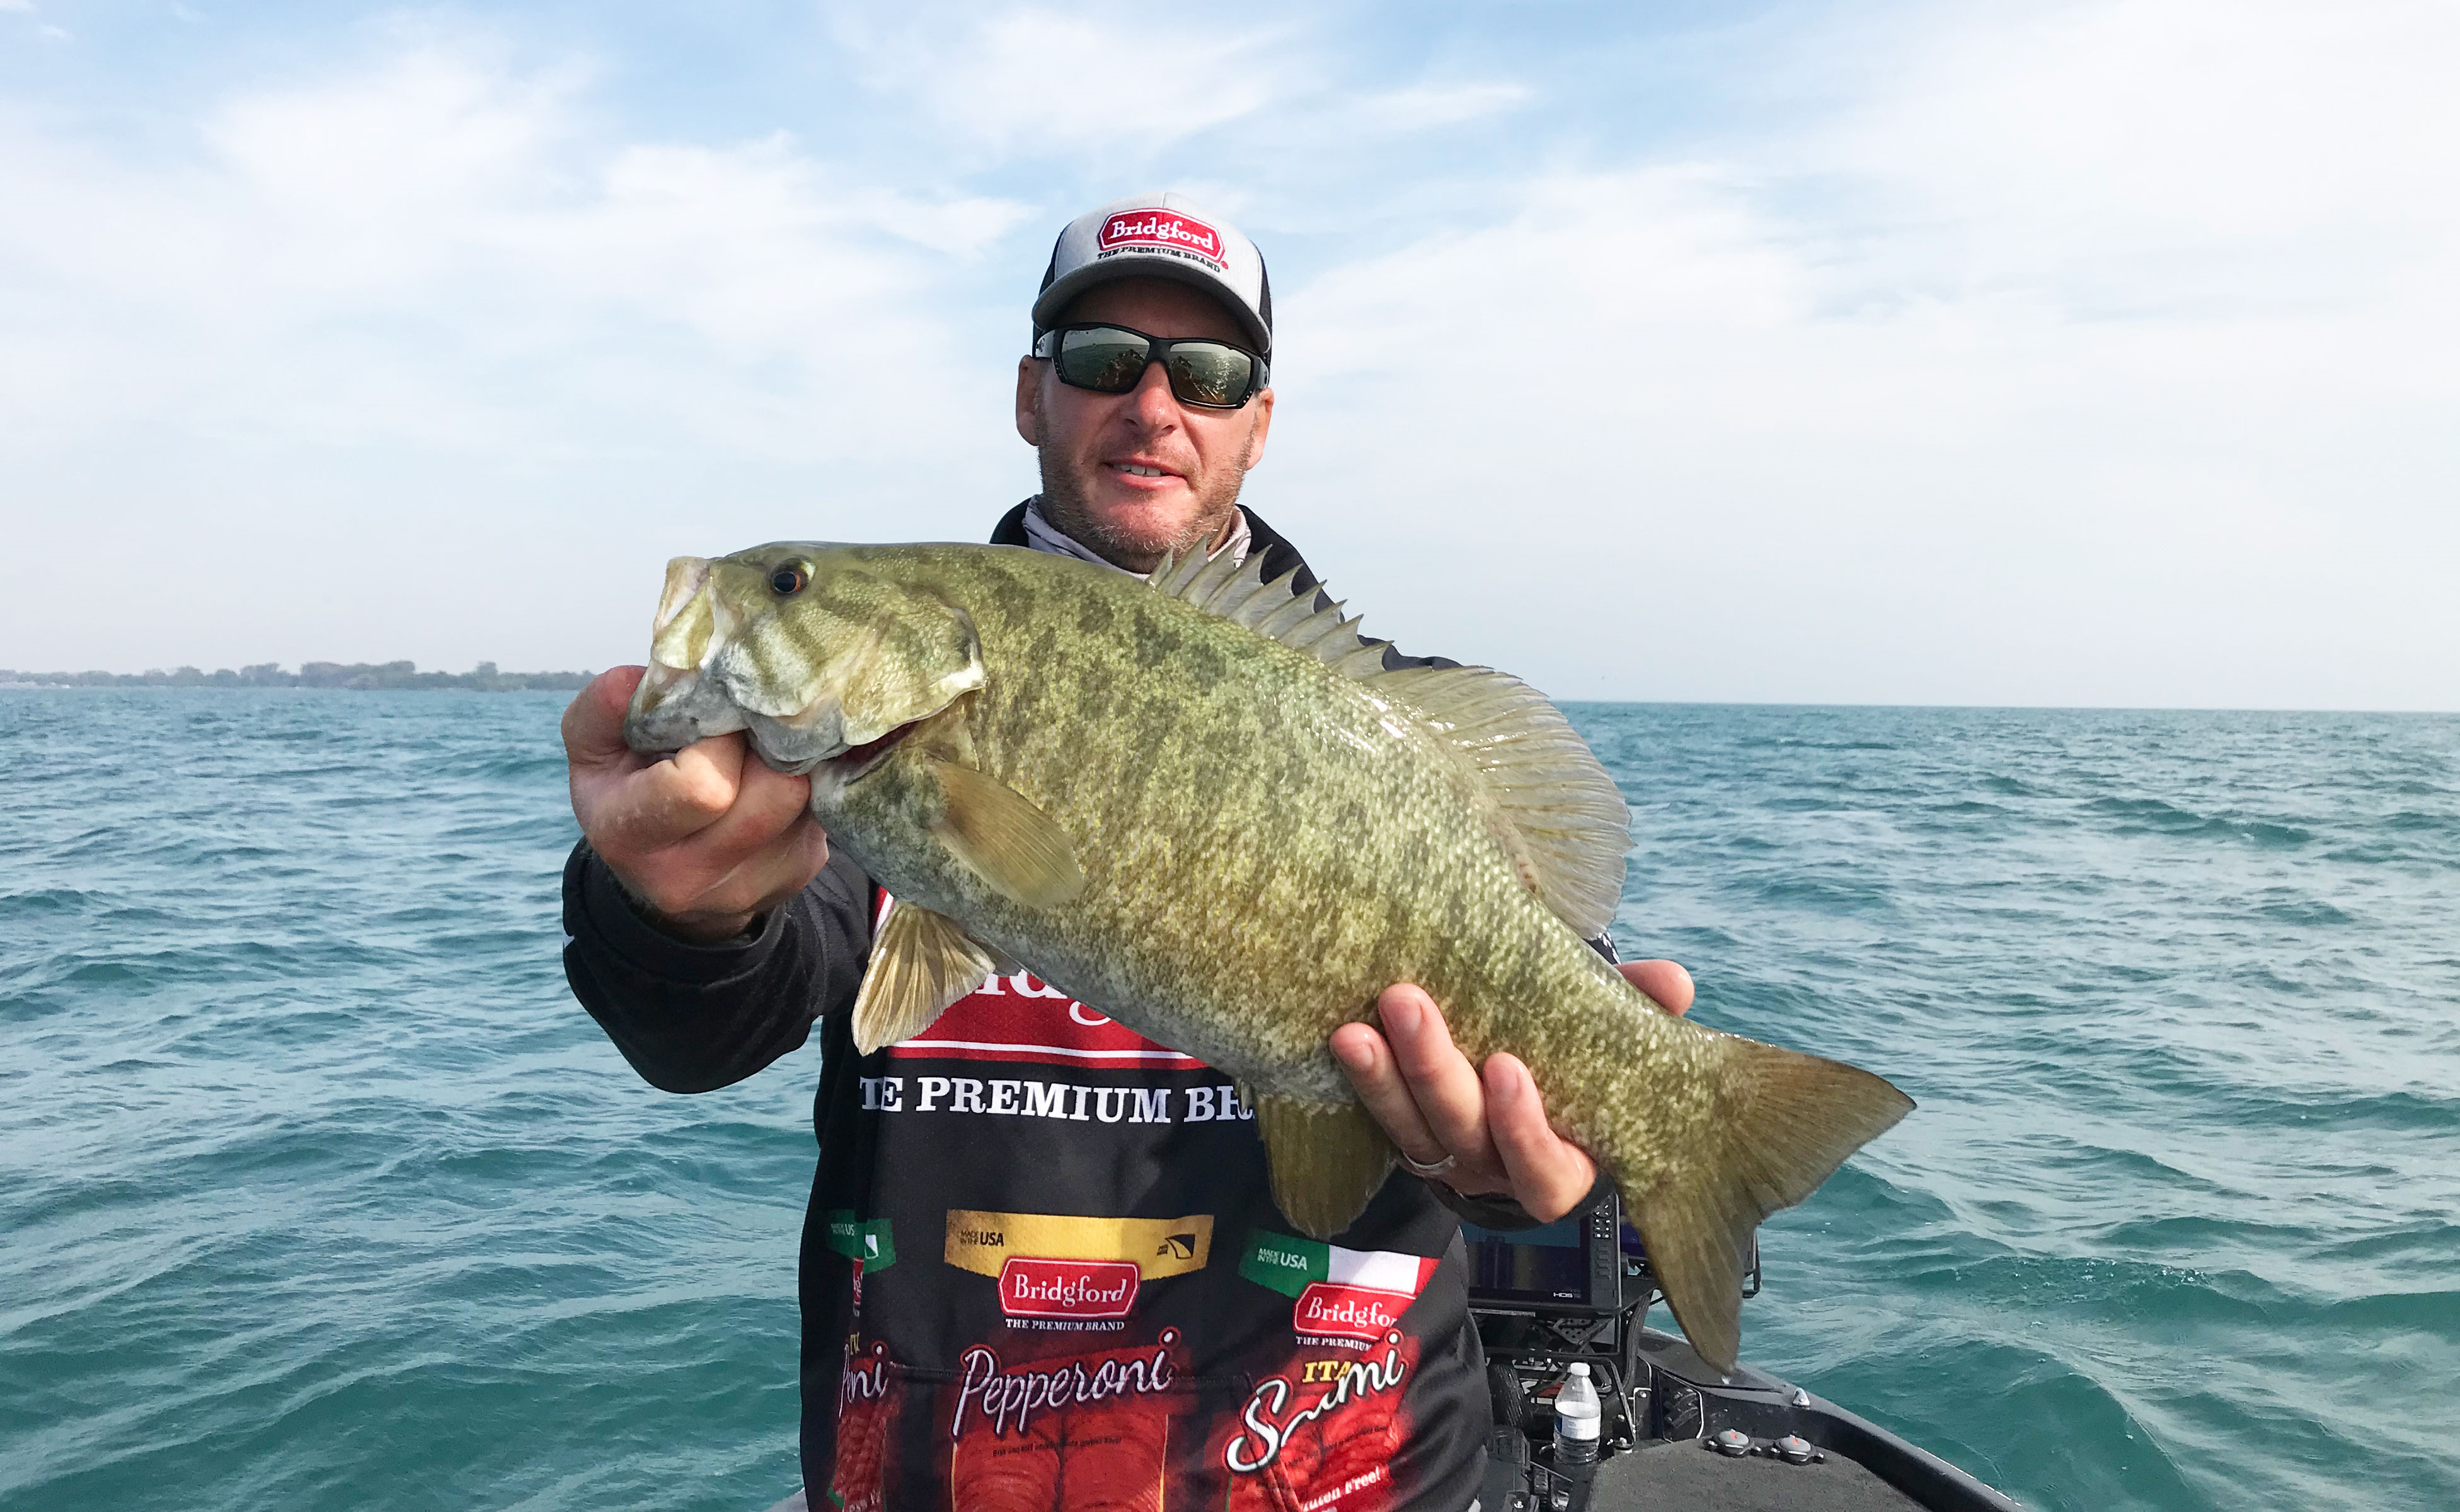 Vary Your Hookset To Land More Bass — Tactical Bassin' - Bass